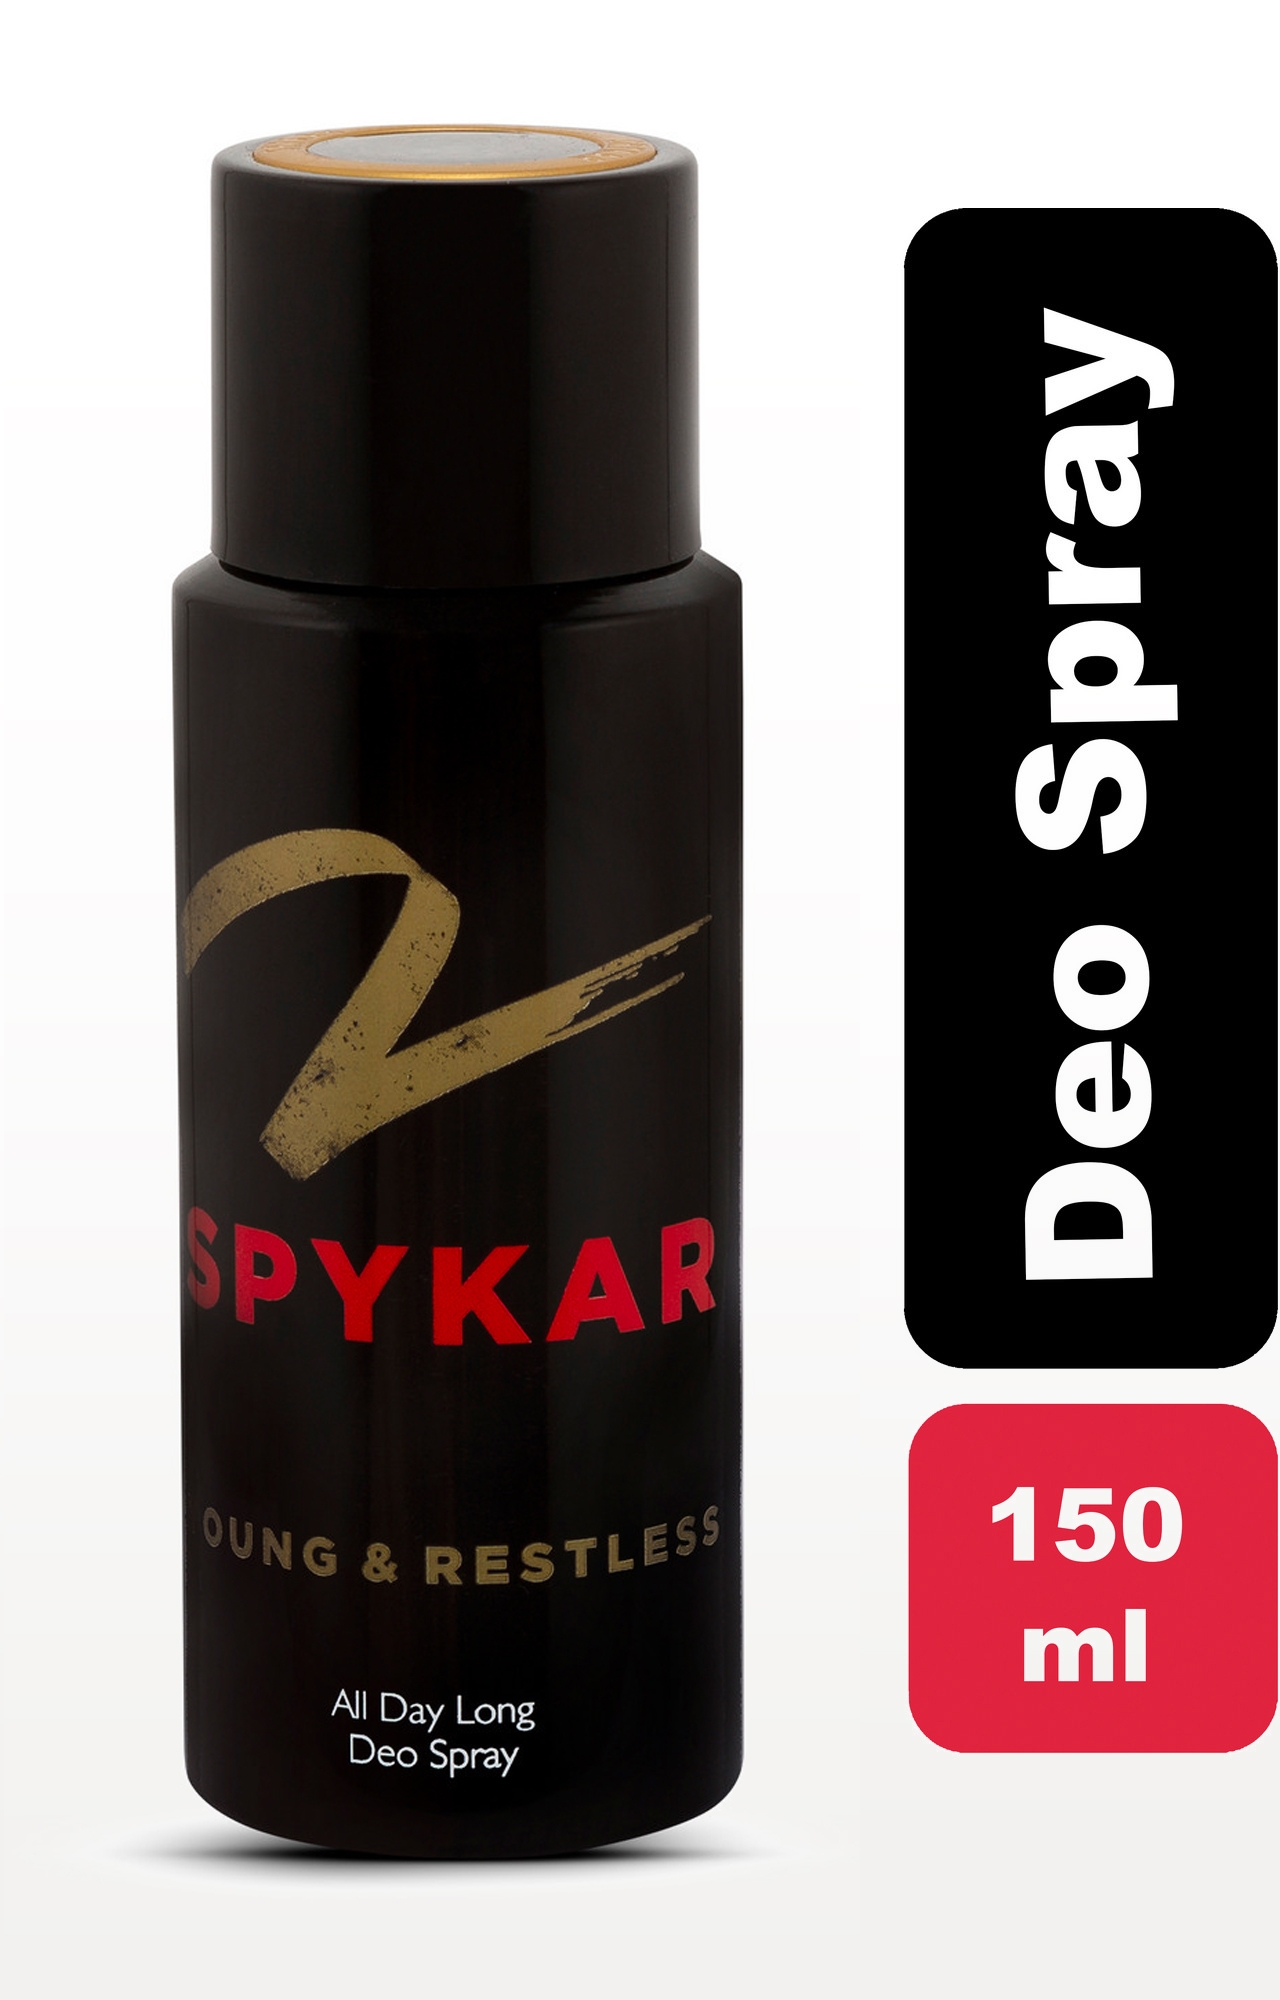 Spykar | Spykar Olive Young and Restyless Deodorant